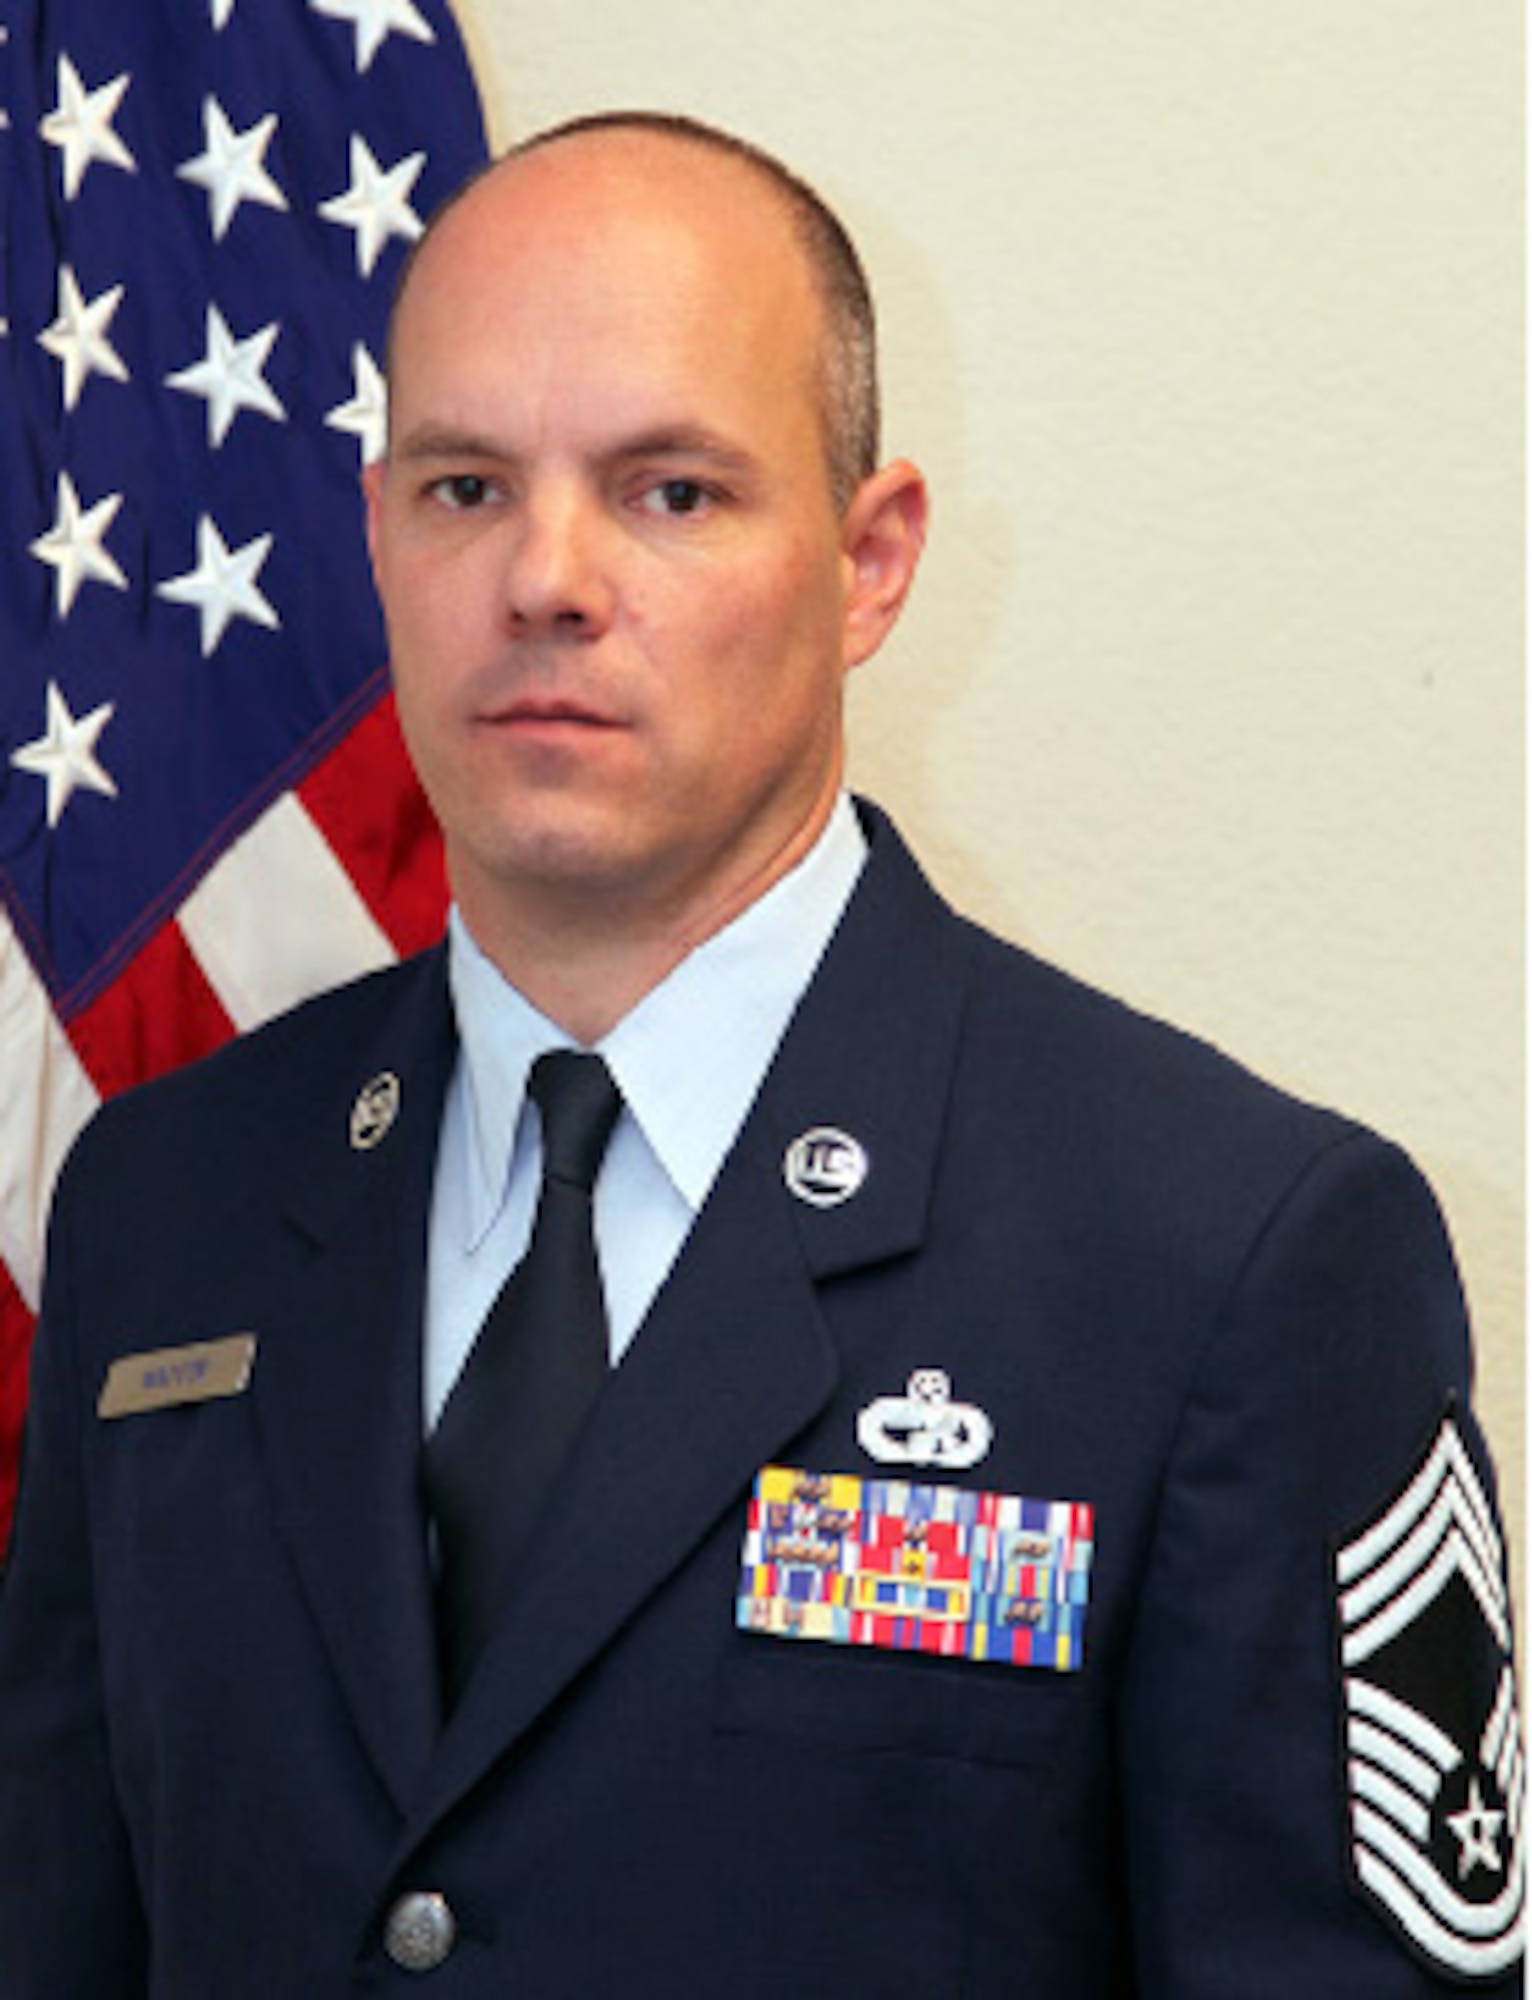 Chief Master Sgt. Jayson J. Watson, 45th Aerial Port Squadron, shares some insight about leadership and how a former chief master sergeant with 36 years of service influeneced him. (Courtesy Photo)